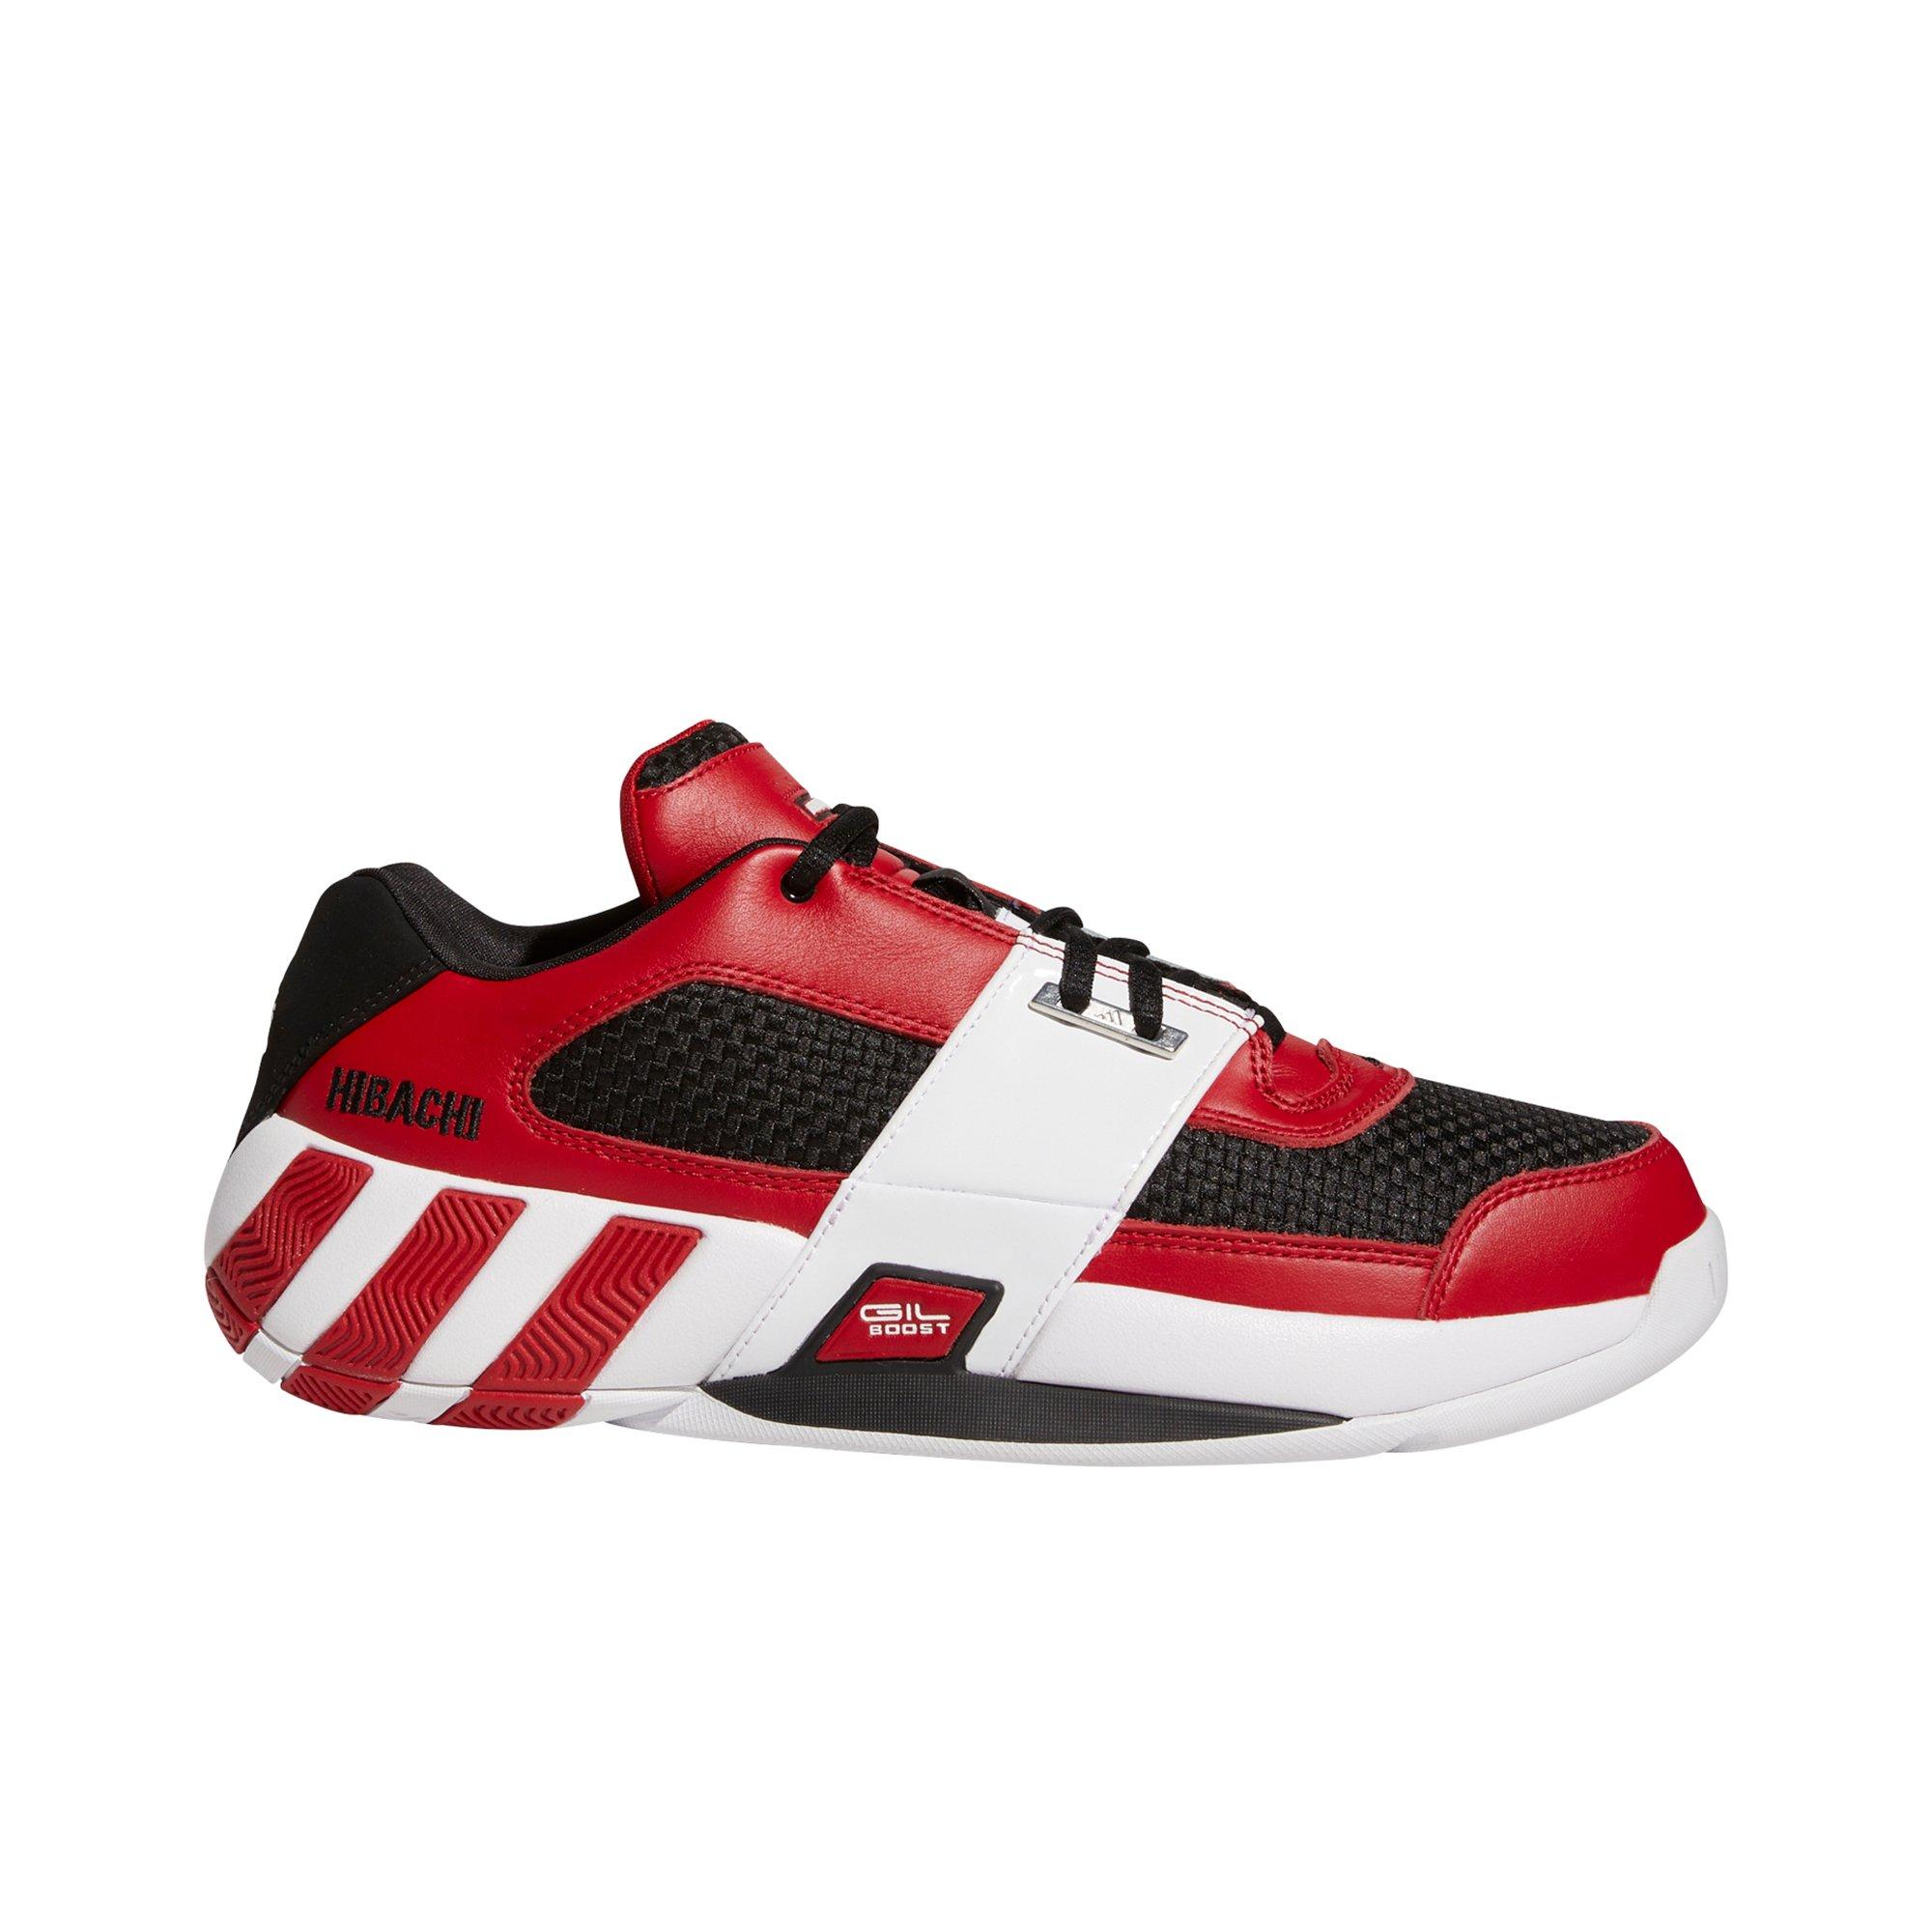 adidas basketball shoes black red